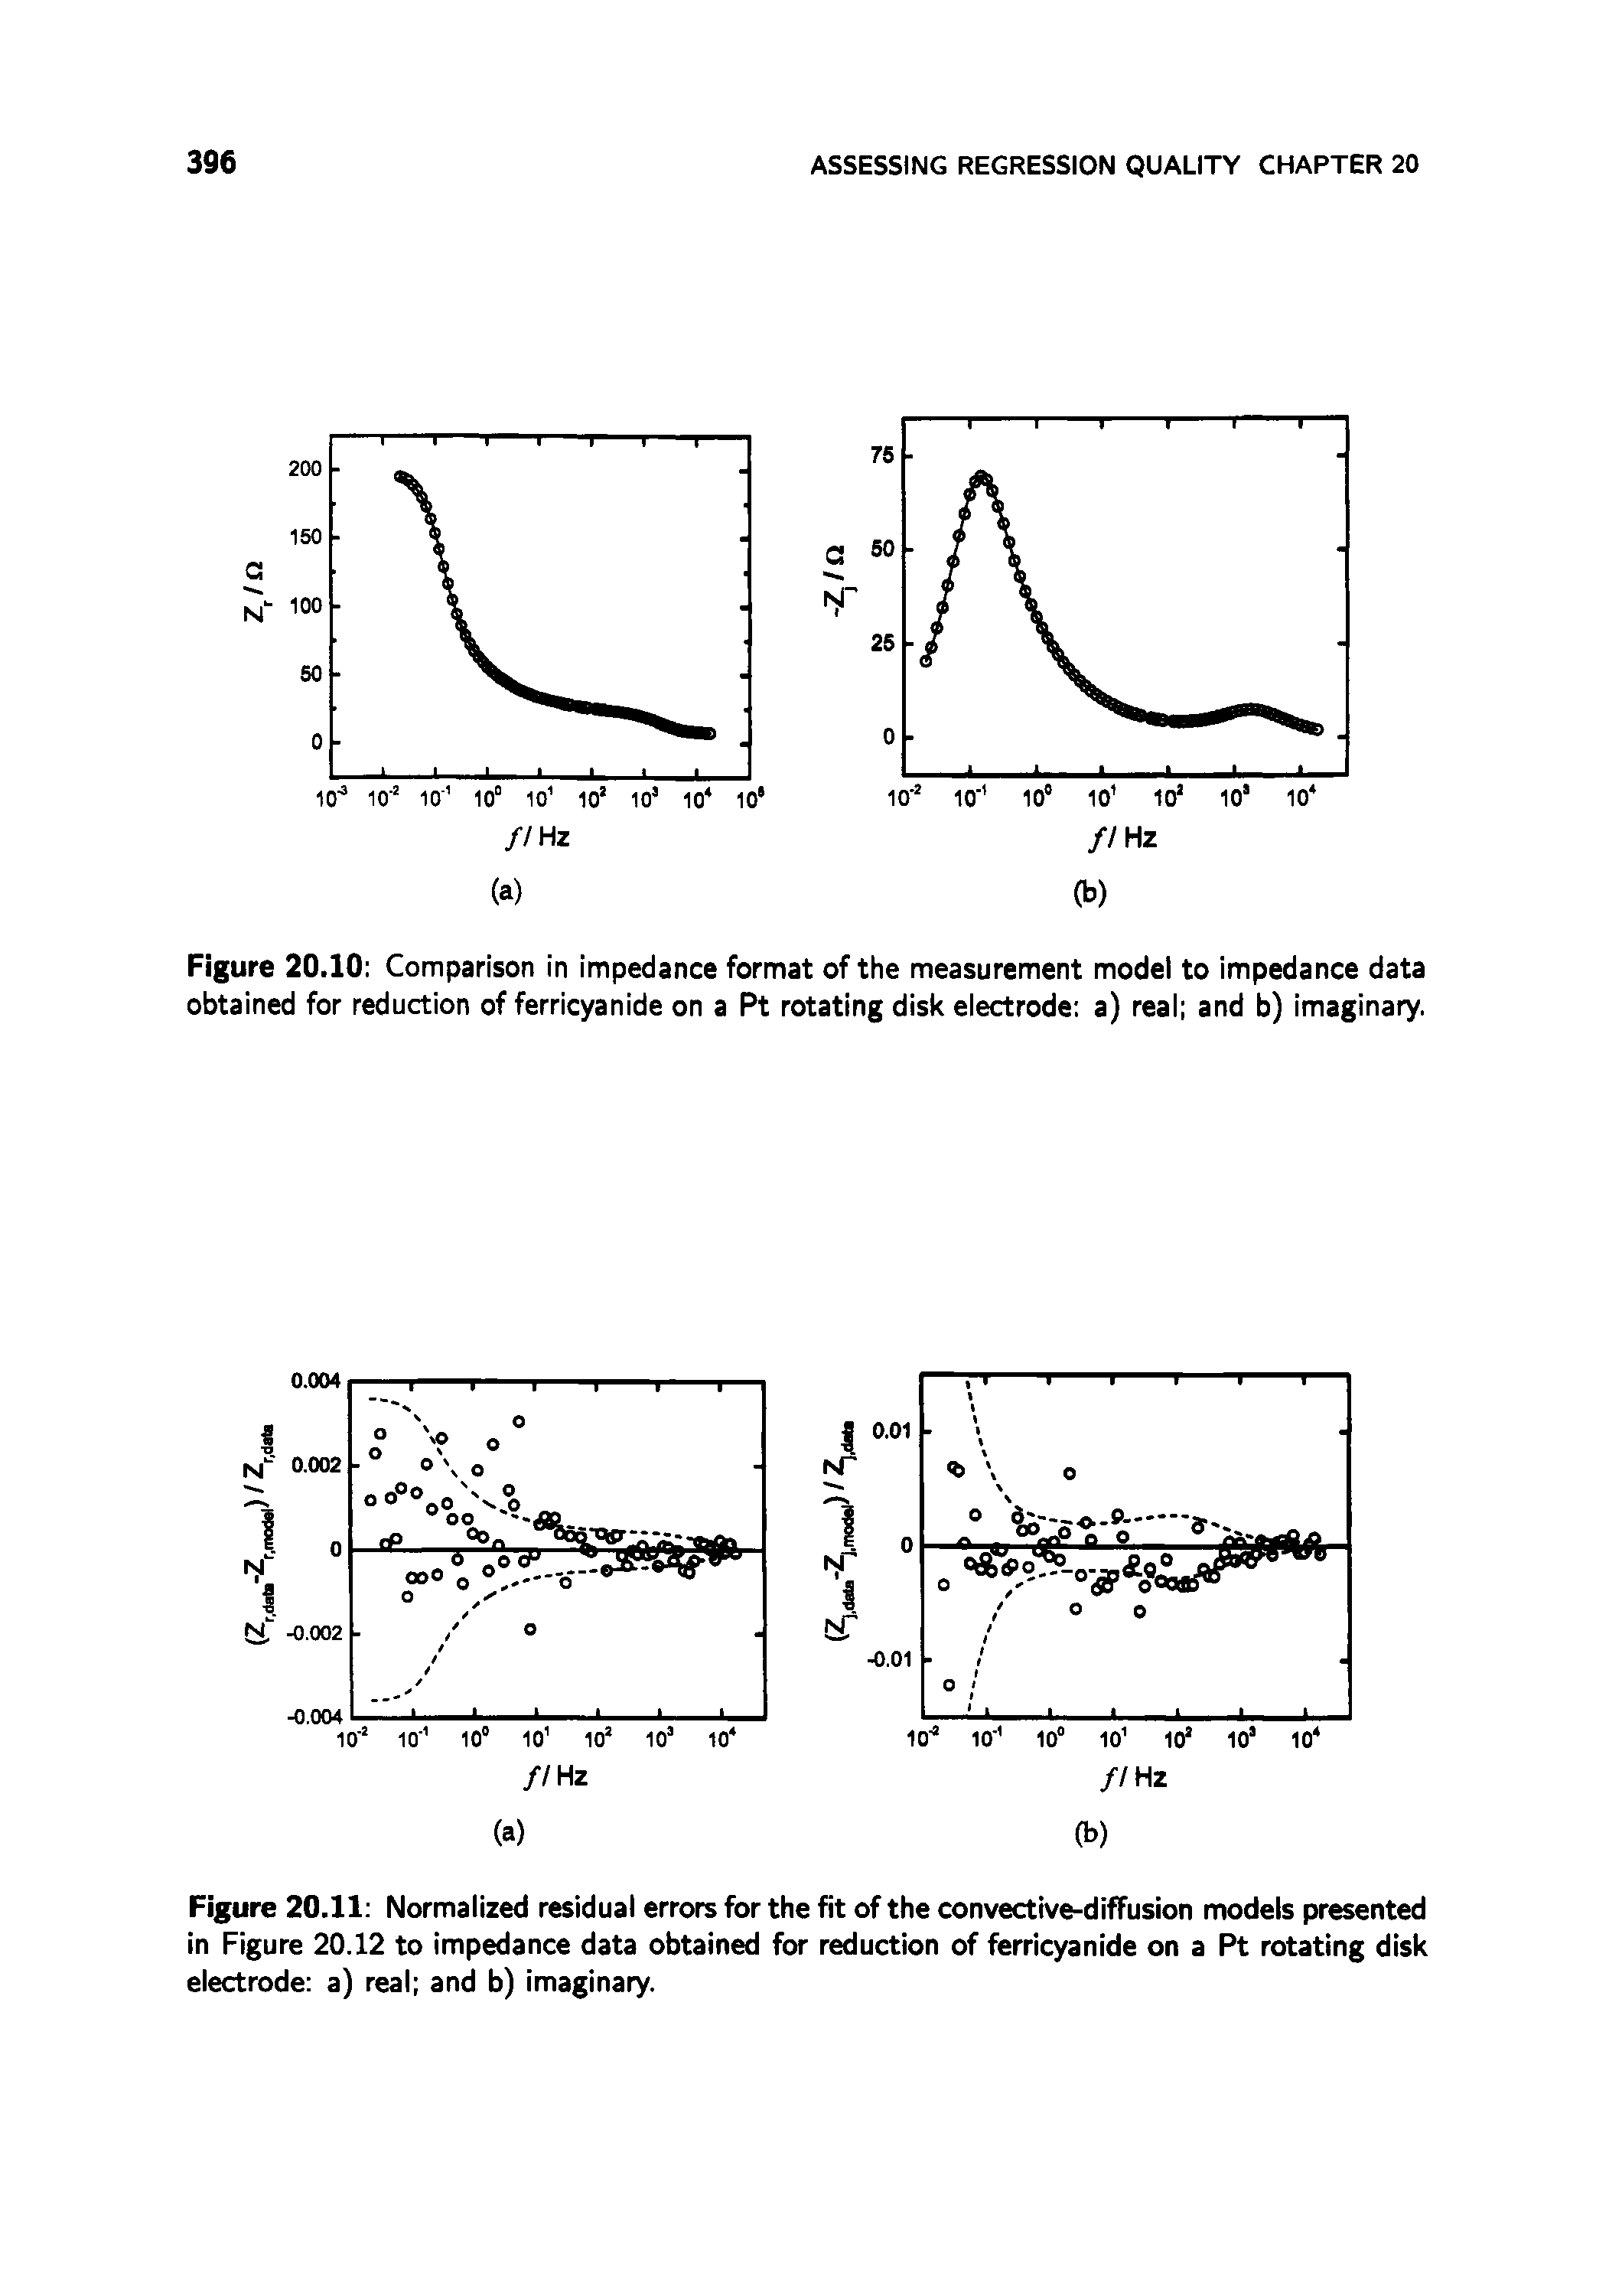 Figure 20.11 Normalized residual errors for the fit of the convective-diffusion models presented in Figure 20.12 to impedance data obtained for reduction of ferricyanide on a Pt rotating disk electrode a) real and b) imaginary.